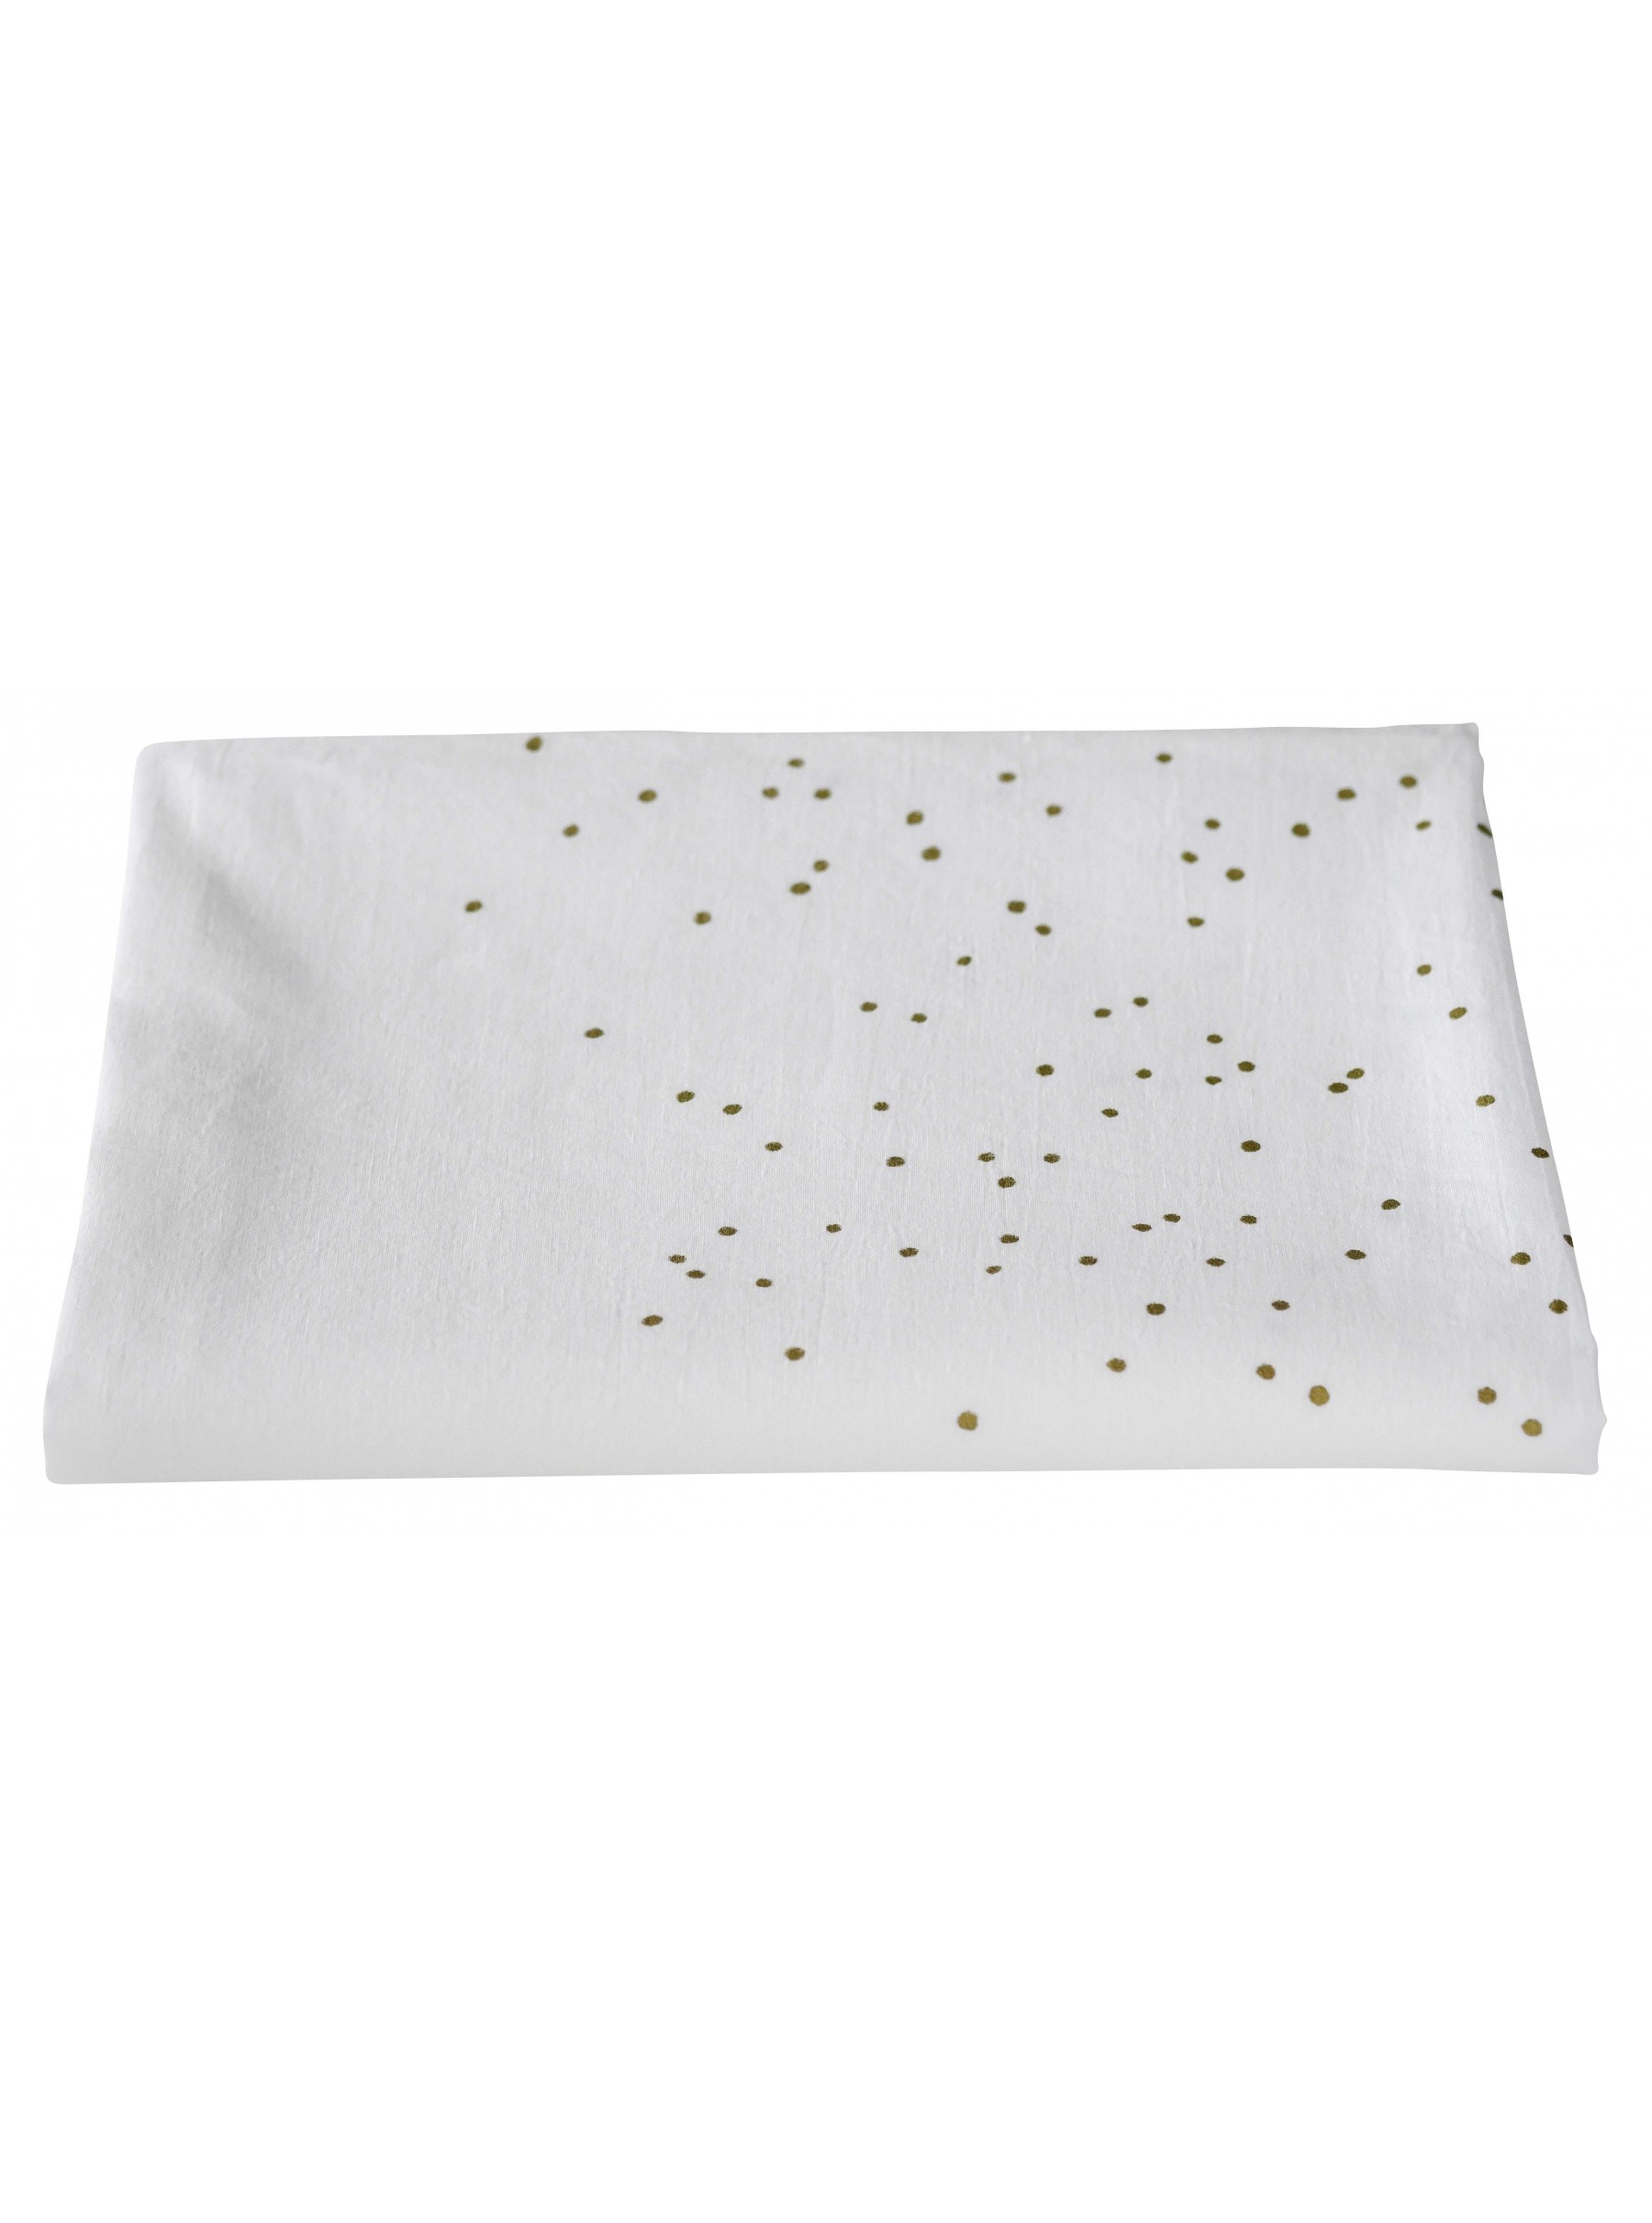 NAPPE LINA MILK PLUIE OR